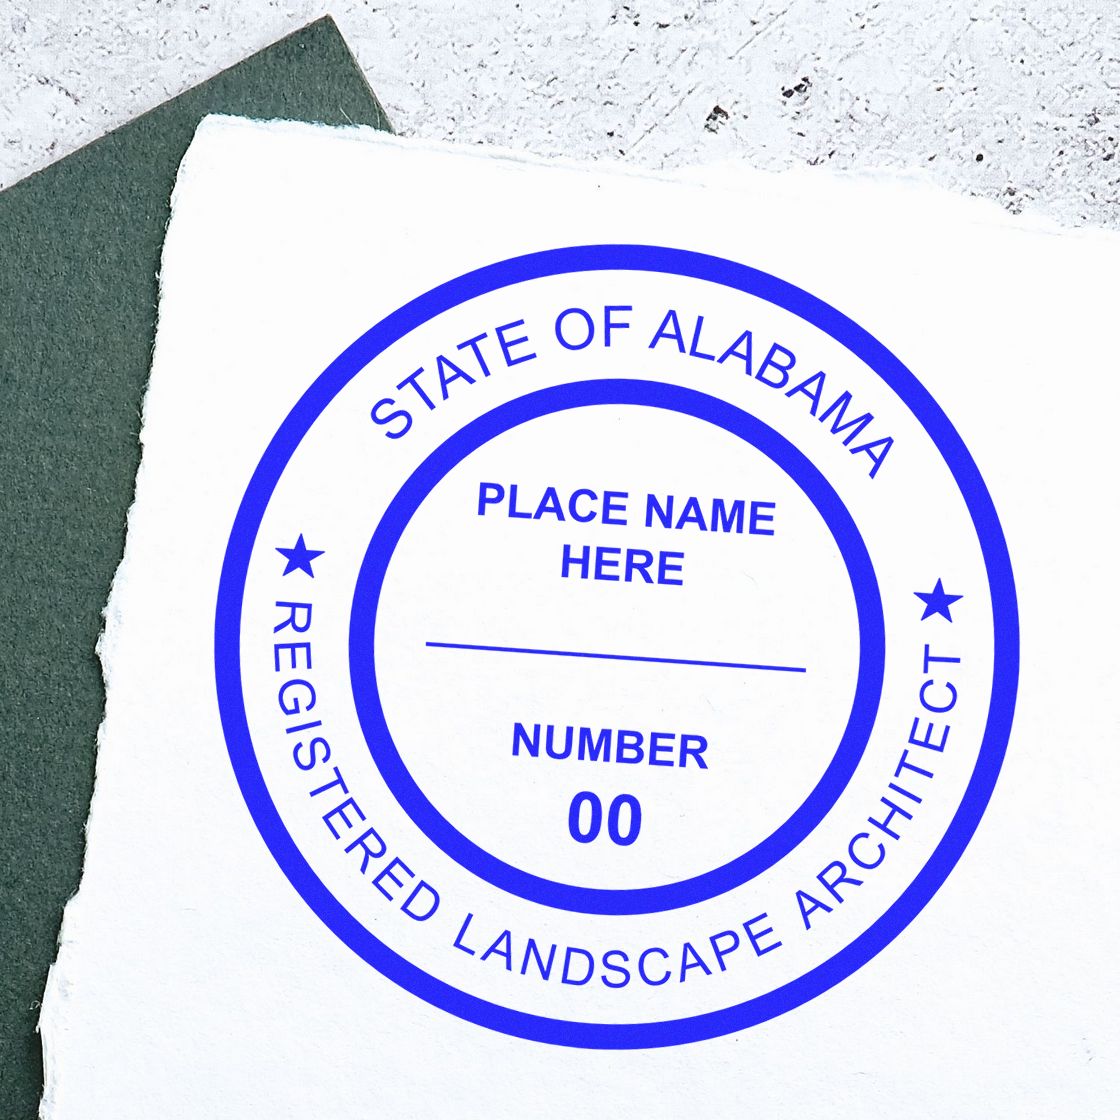 The Digital Alabama Landscape Architect Stamp stamp impression comes to life with a crisp, detailed photo on paper - showcasing true professional quality.